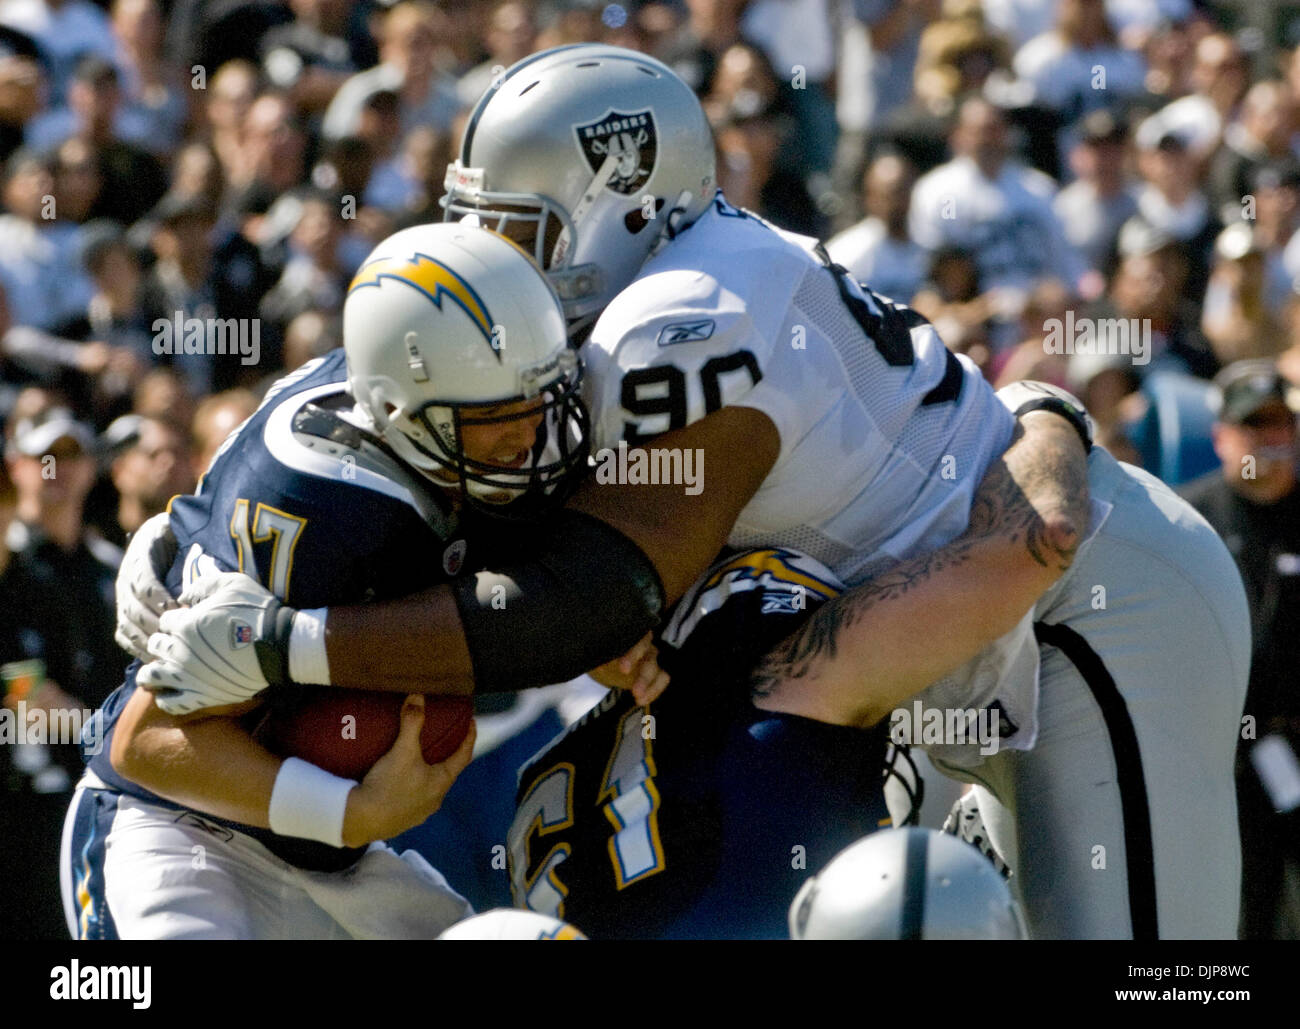 Sep 28, 2008 - OAKLAND, CA, USA - Oakland Raiders defensive tackle TERDELL SANDS #90 sacks San Diego Chargers quarterback PHILIP RIVERS #17 during a game at McAfee Coliseum. (Credit Image: © AL GOLUB/Golub Photography/Golub Photography) Stock Photo